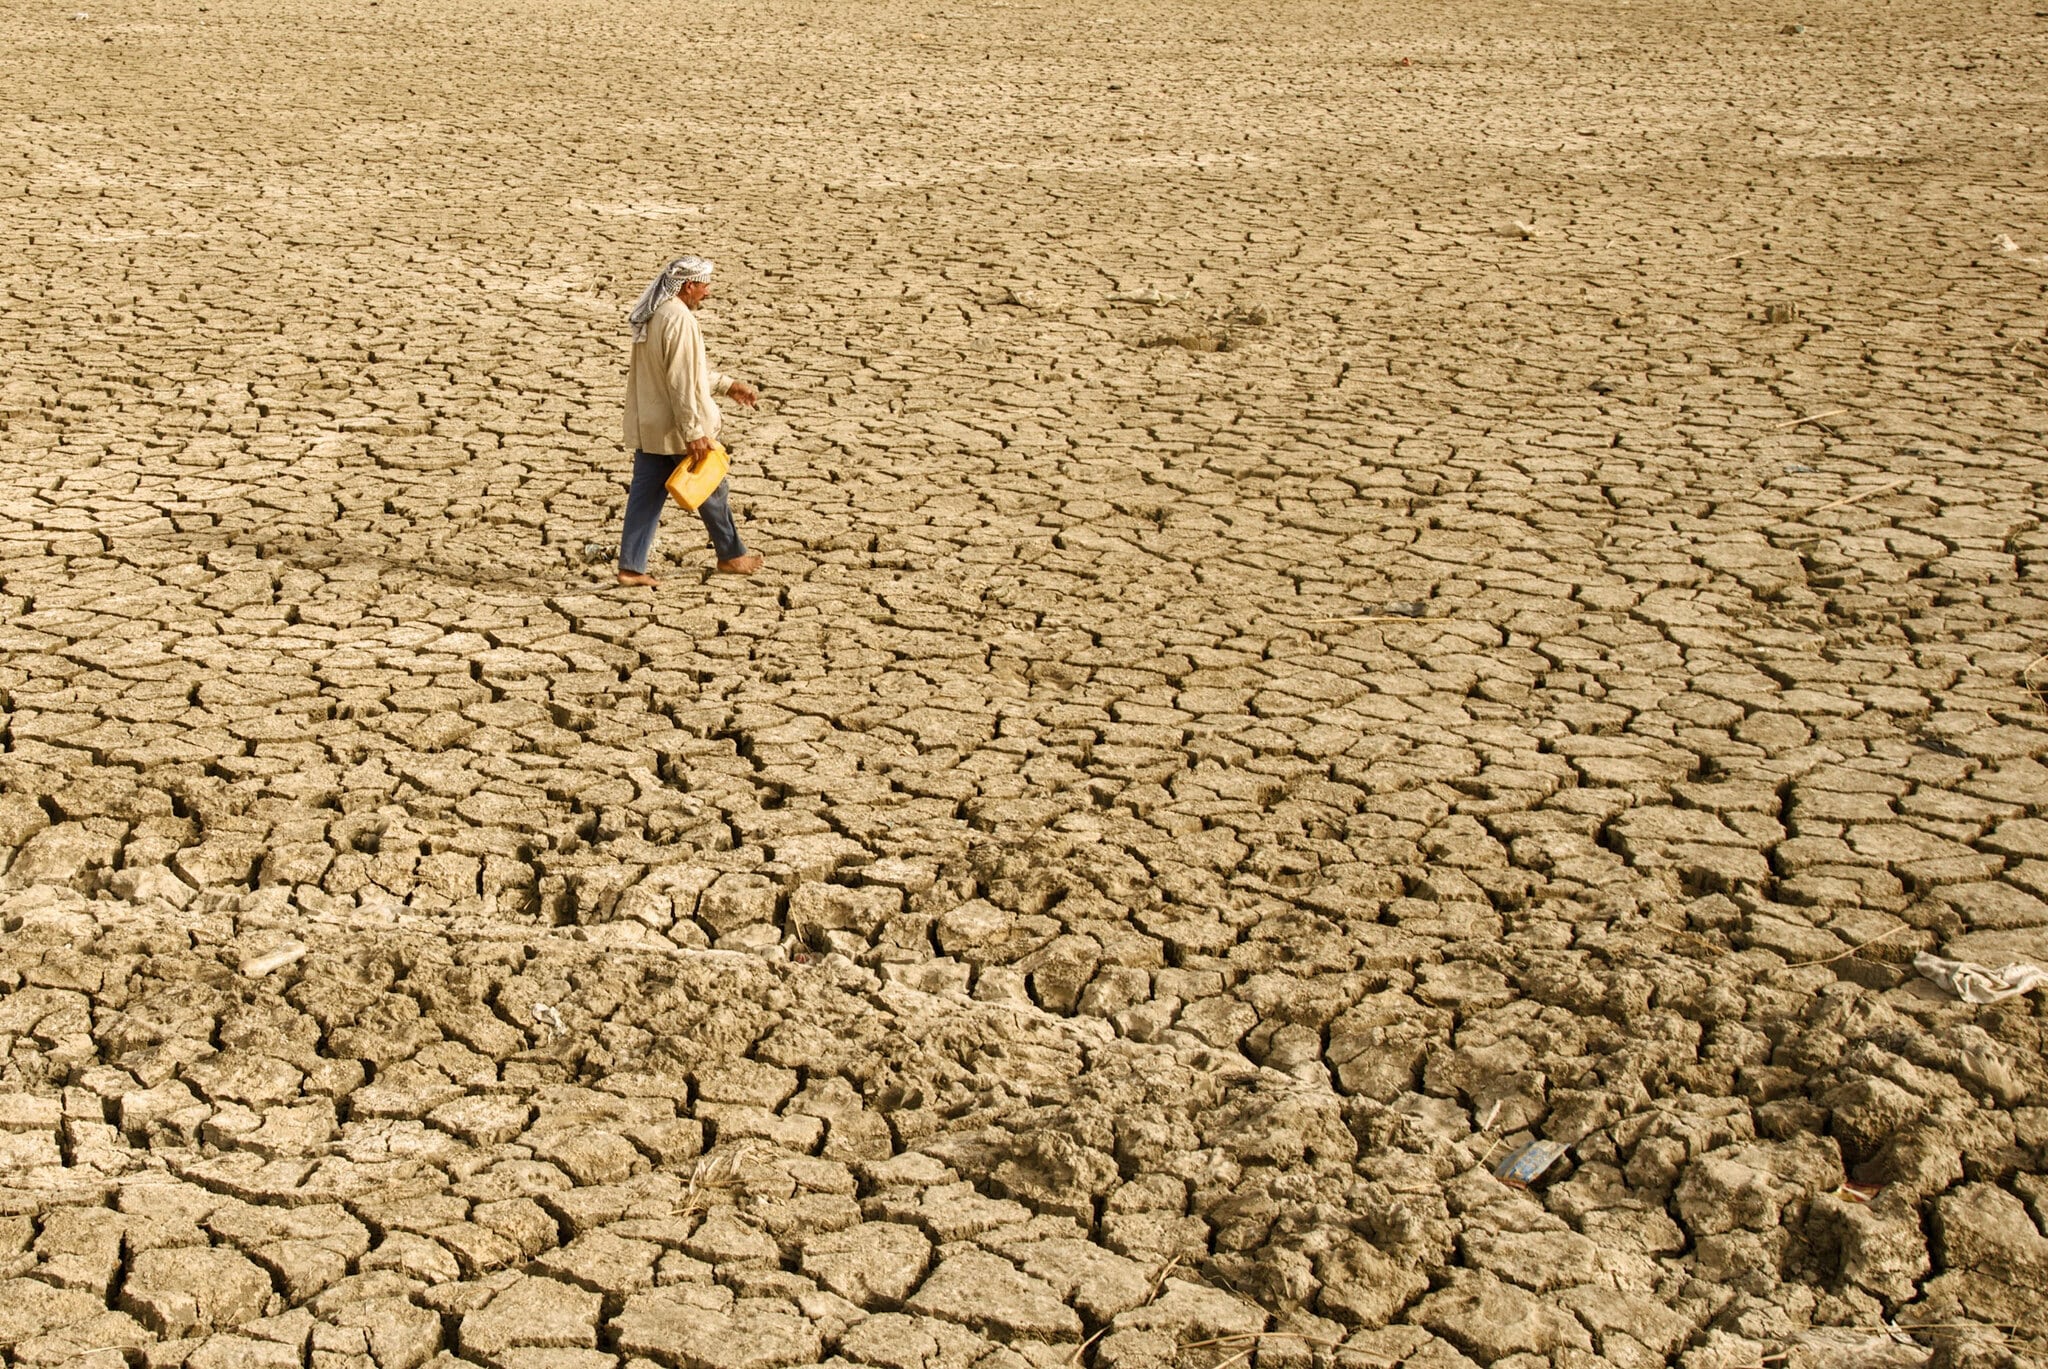 climate change in Iraq; drought and arid conditions in iraq; woman walking on arid land in Iraq